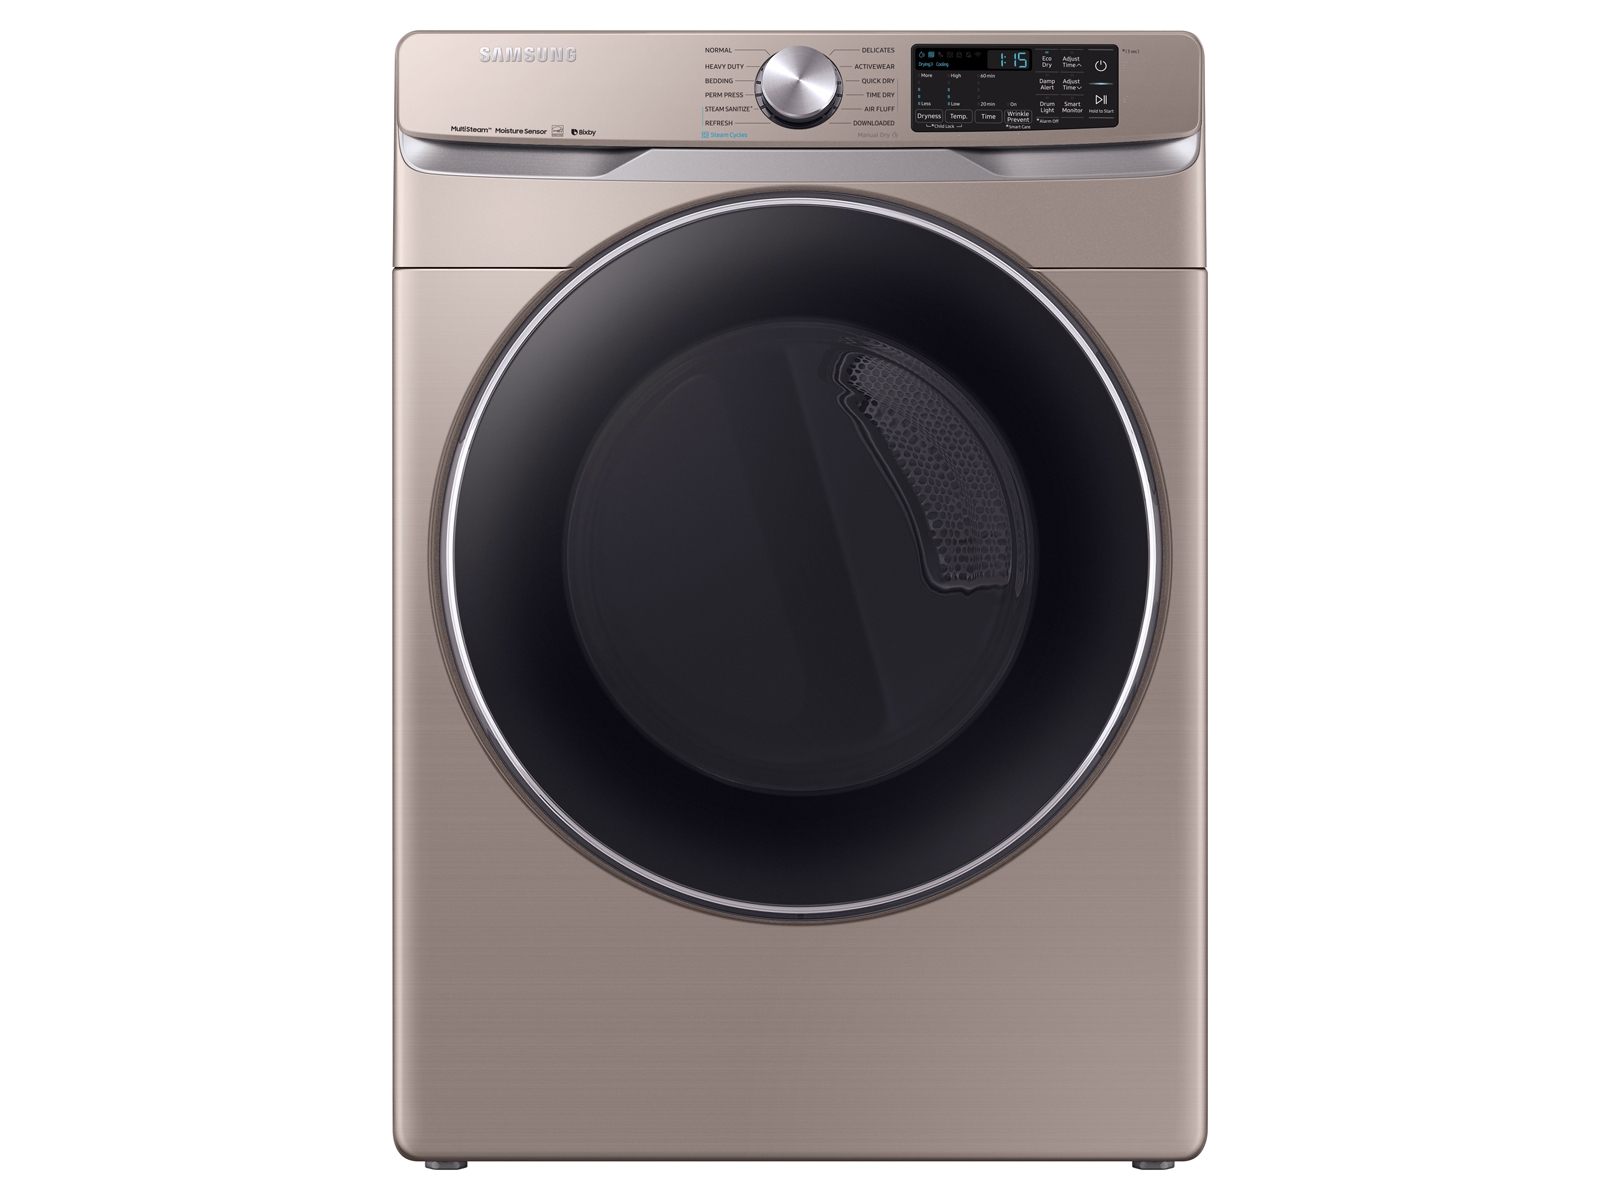 Samsung SAWADRGC61002 Side-by-Side on Pedestals Washer & Dryer Set with  Front Load Washer and Gas Dryer in Champagne